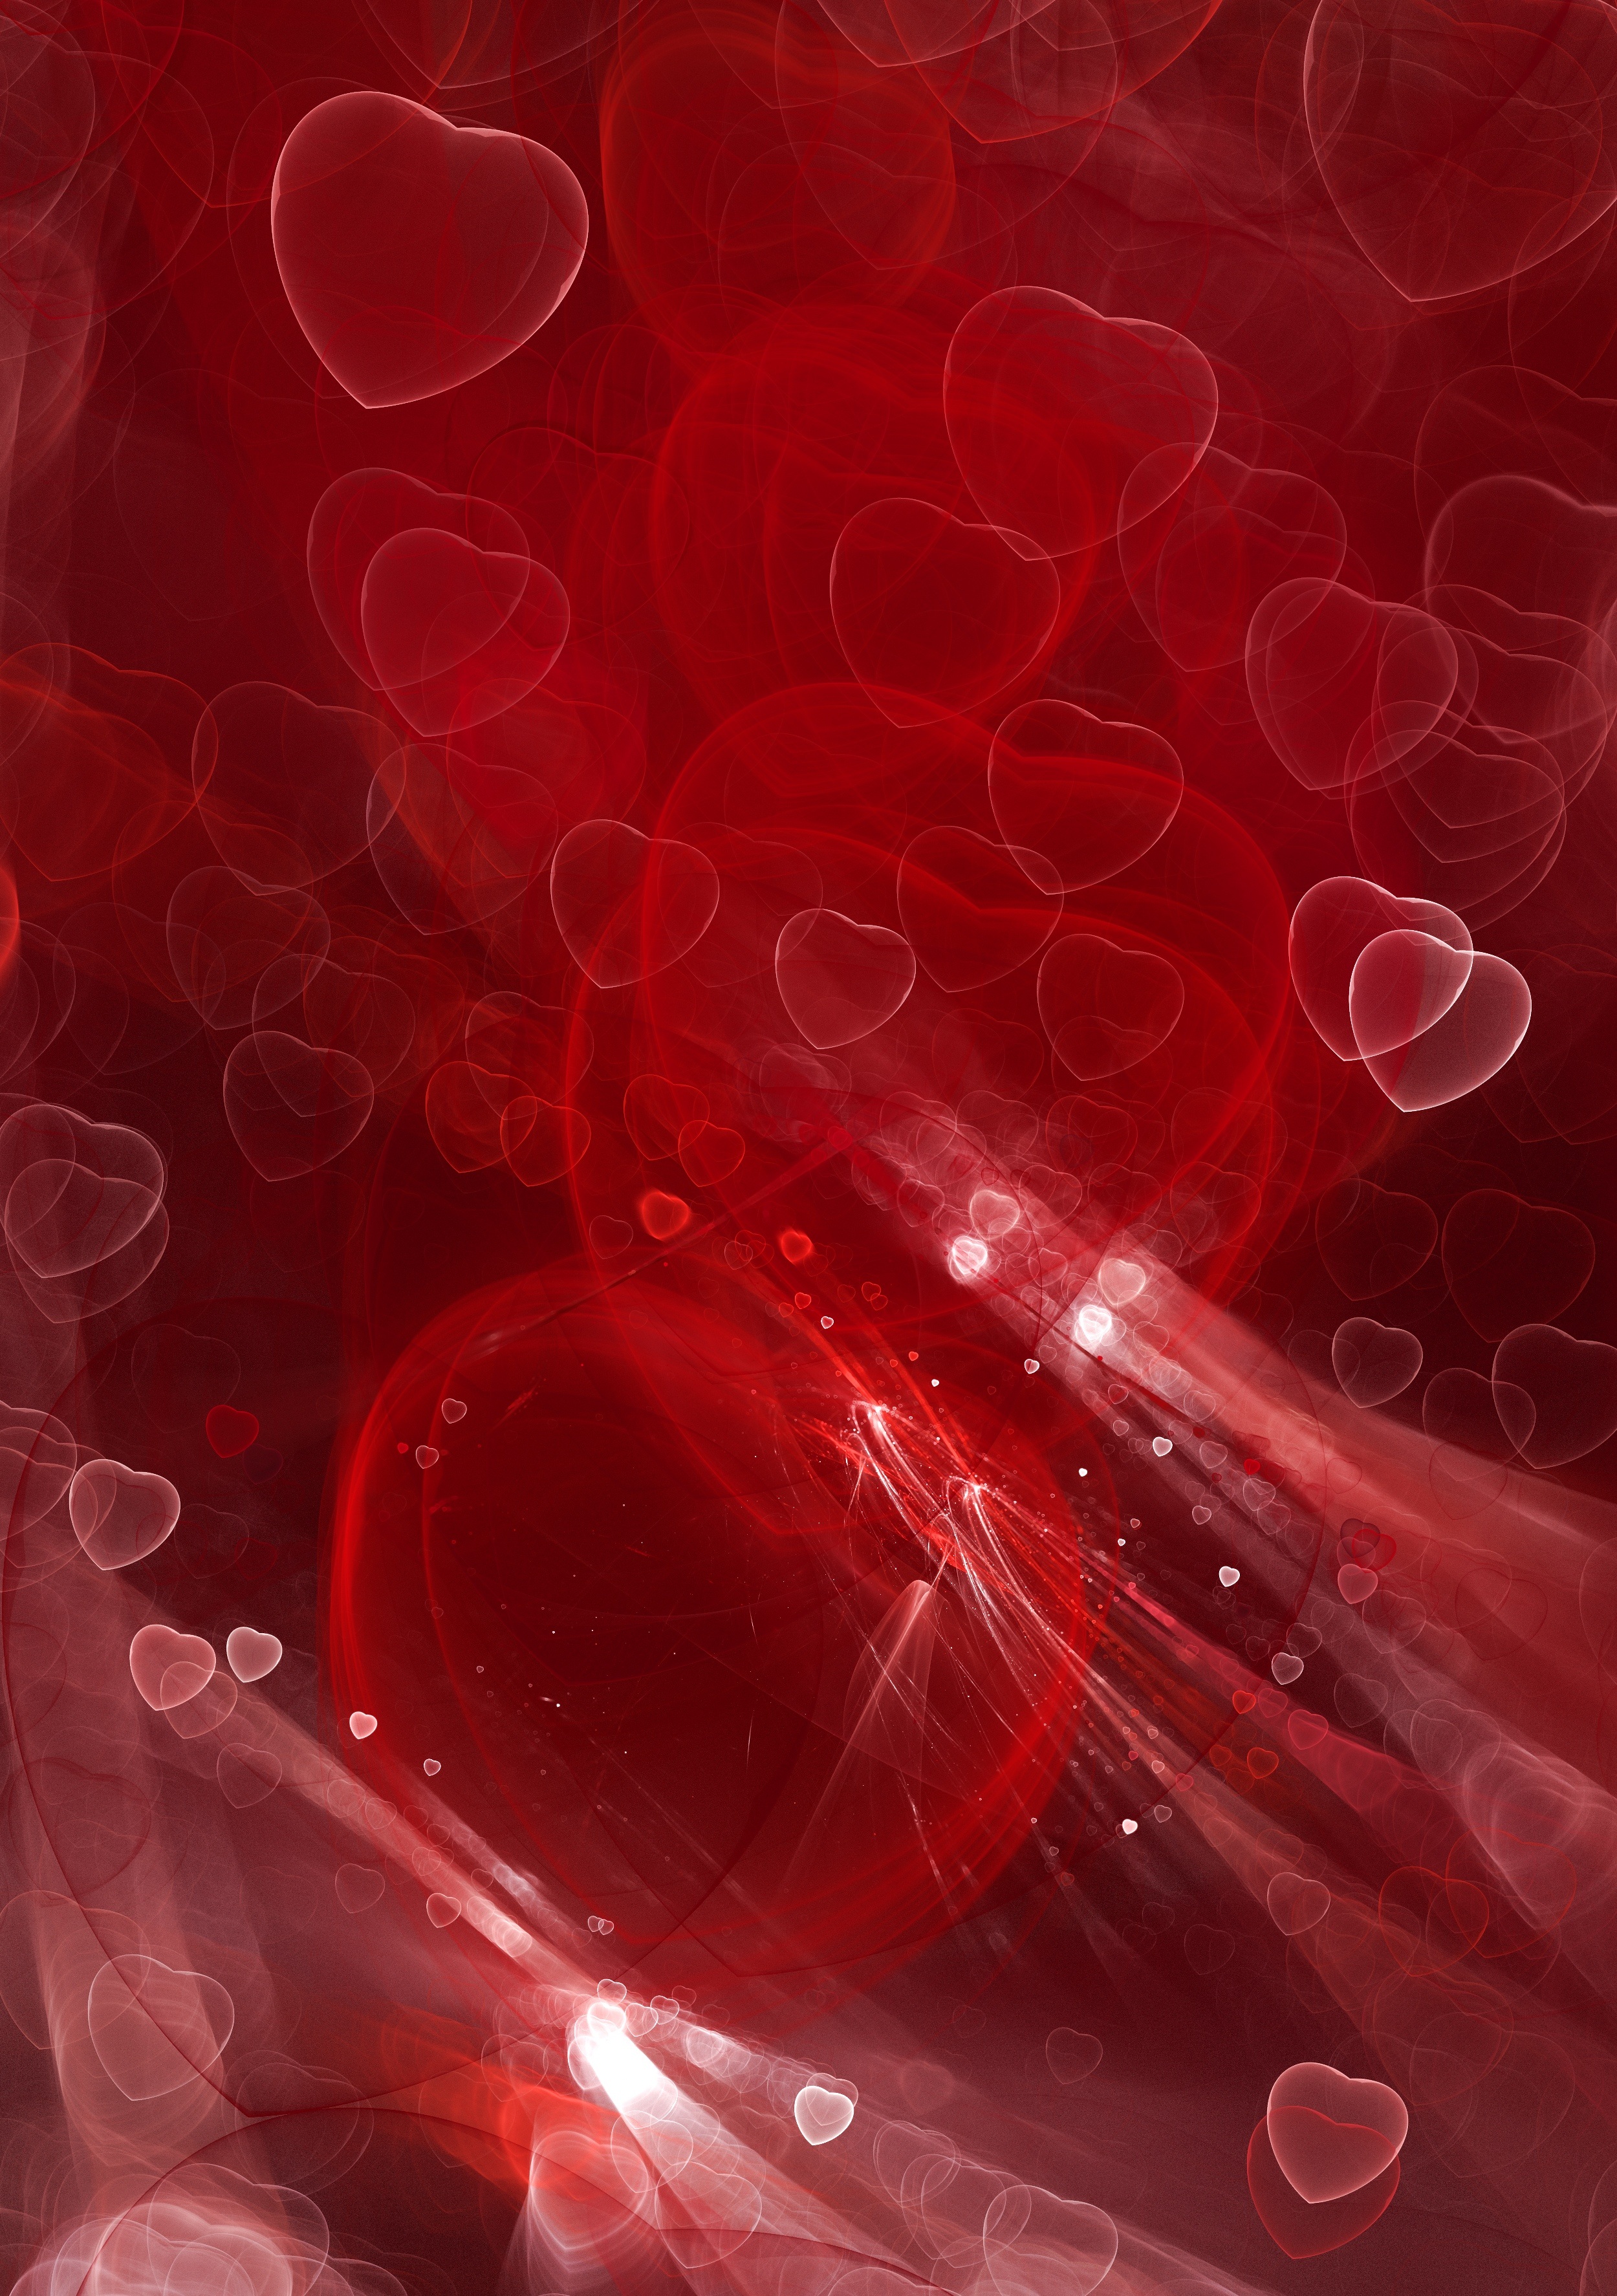 109202 download wallpaper hearts, love, red, shine, brilliance, fractal screensavers and pictures for free